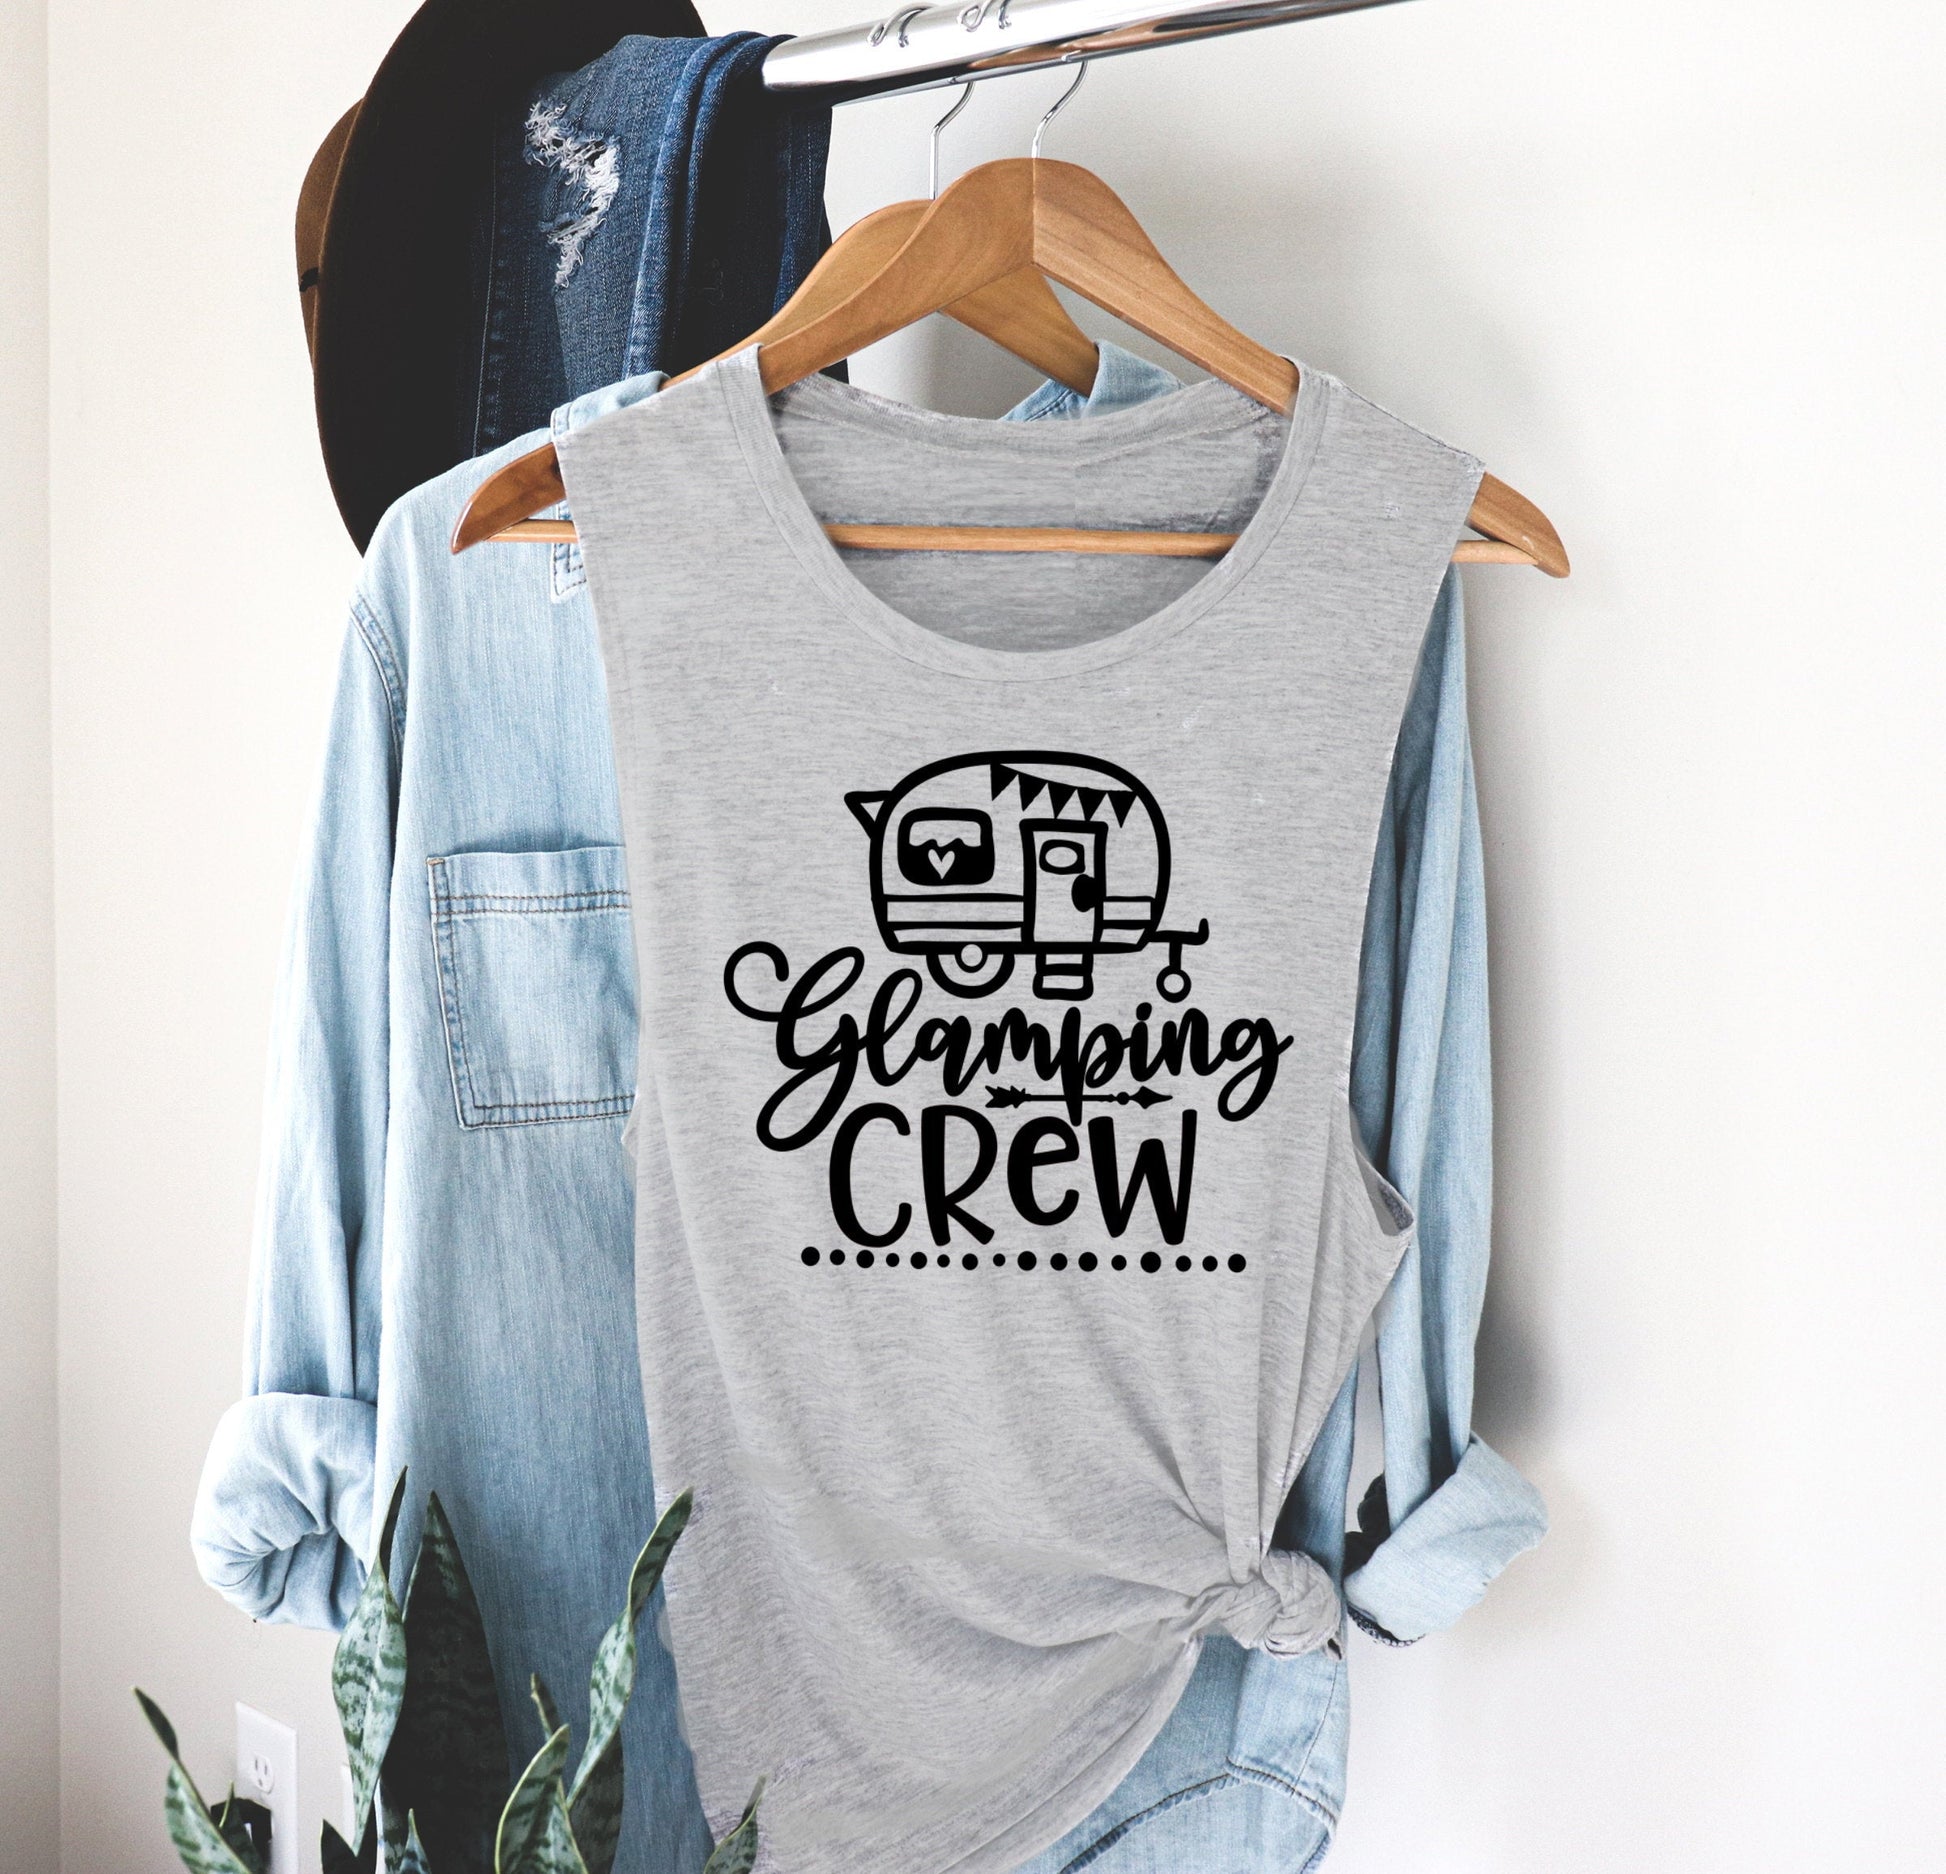 Glamping Crew, Funny Camping Tee, Camper RV Camp Novelty Women’s Flowy Racerback Tank Shirt